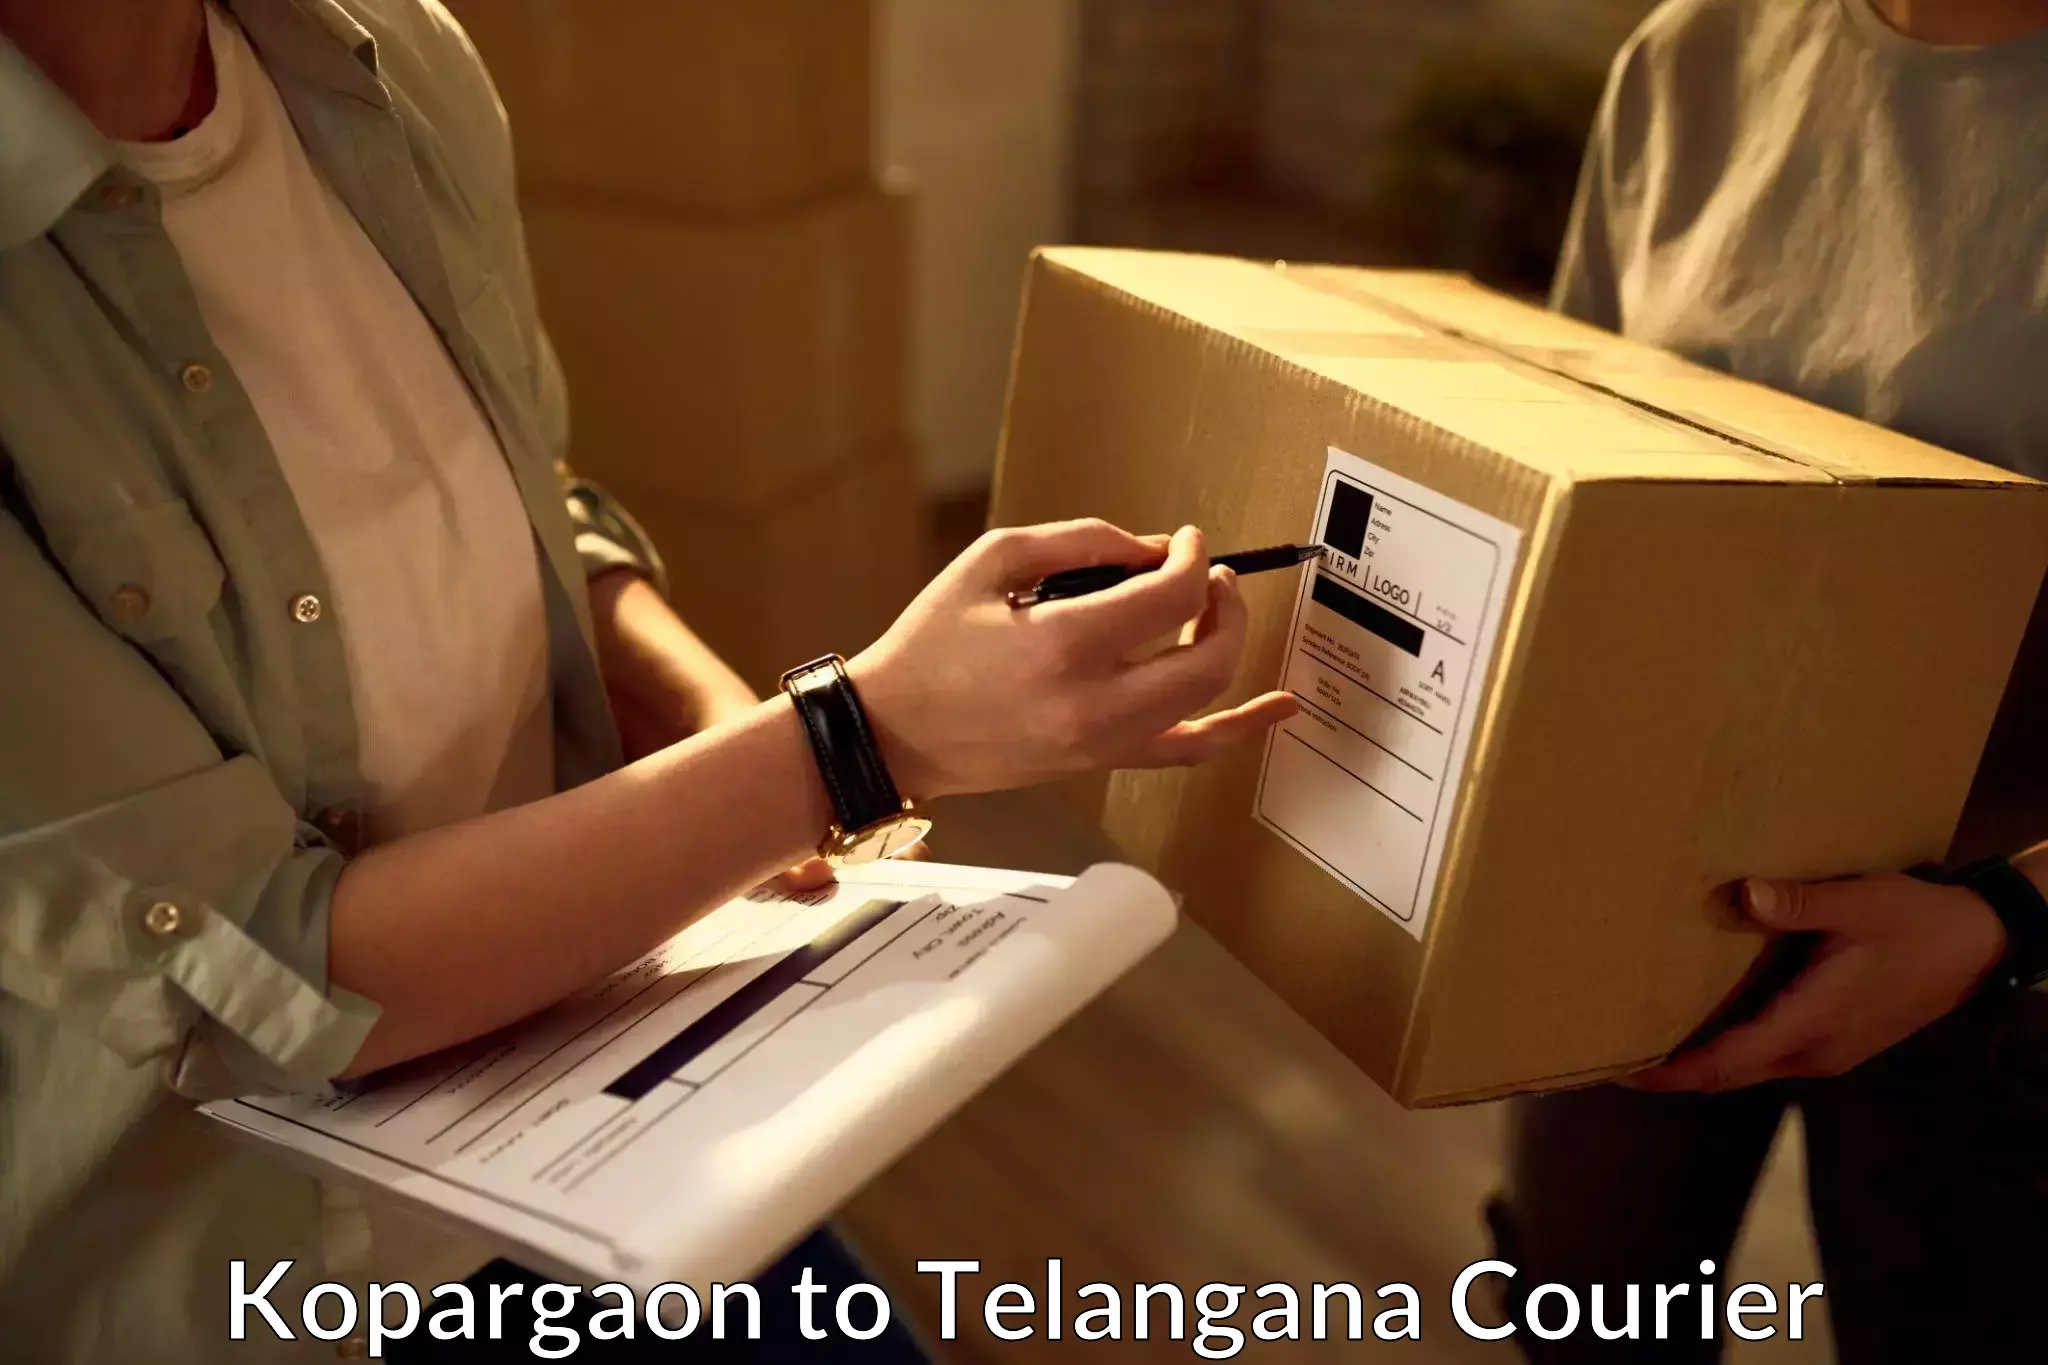 State-of-the-art courier technology Kopargaon to Manneguda